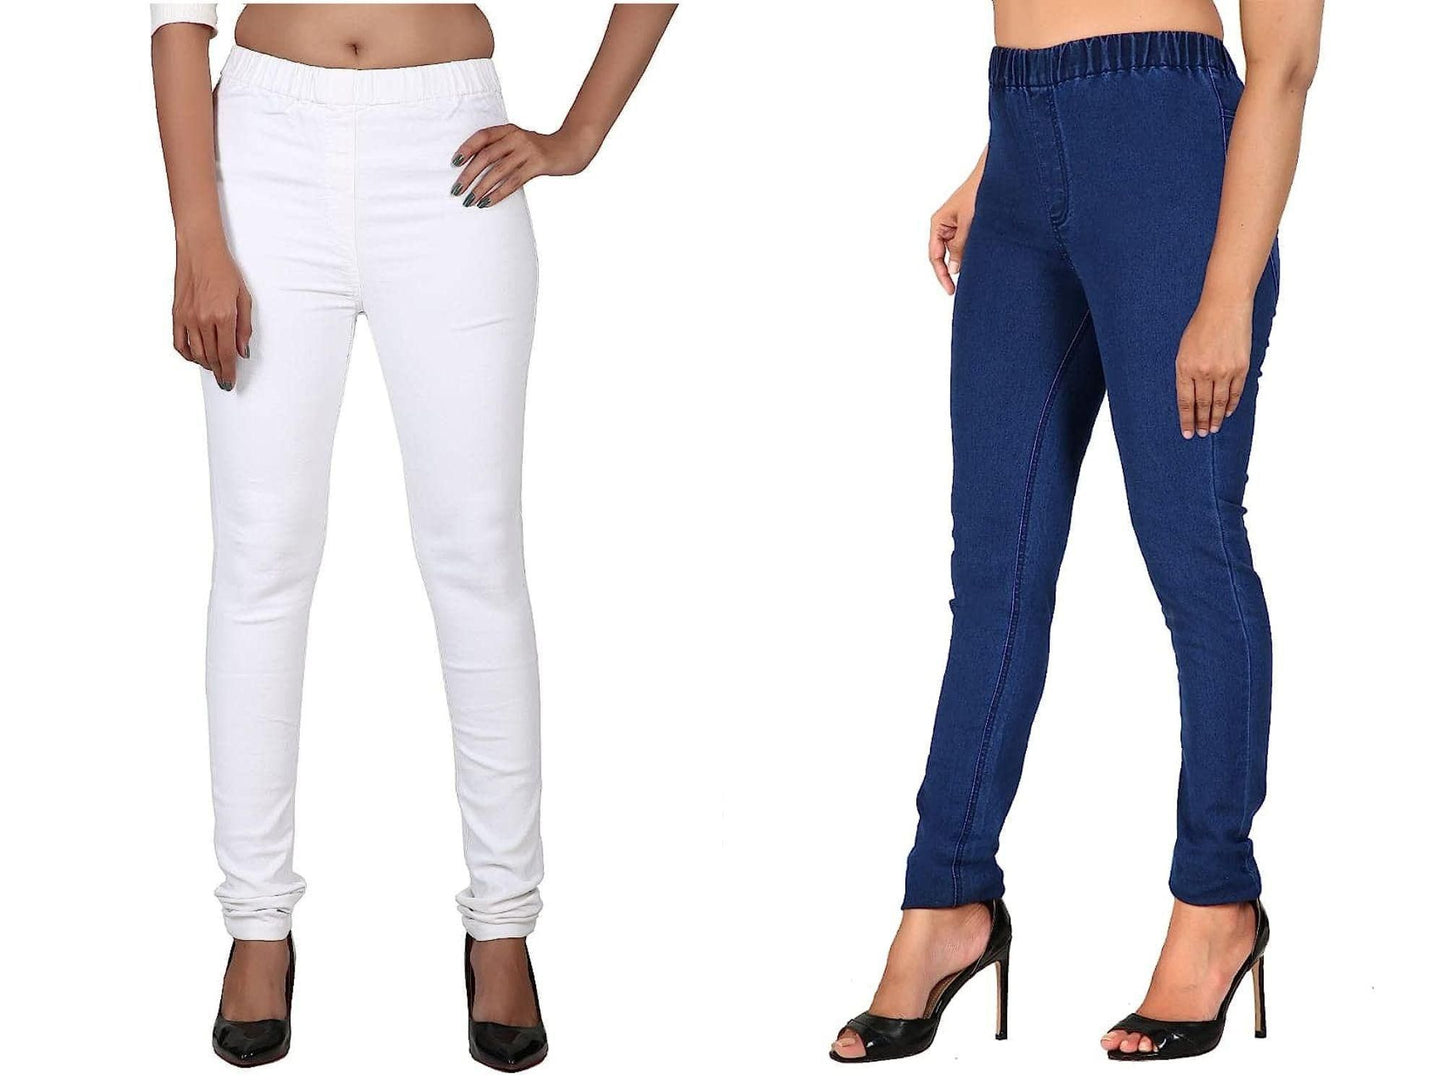 FITWINGS Combo of 2 Women's Slim Fit Denim Lycra Stretchable Jegging